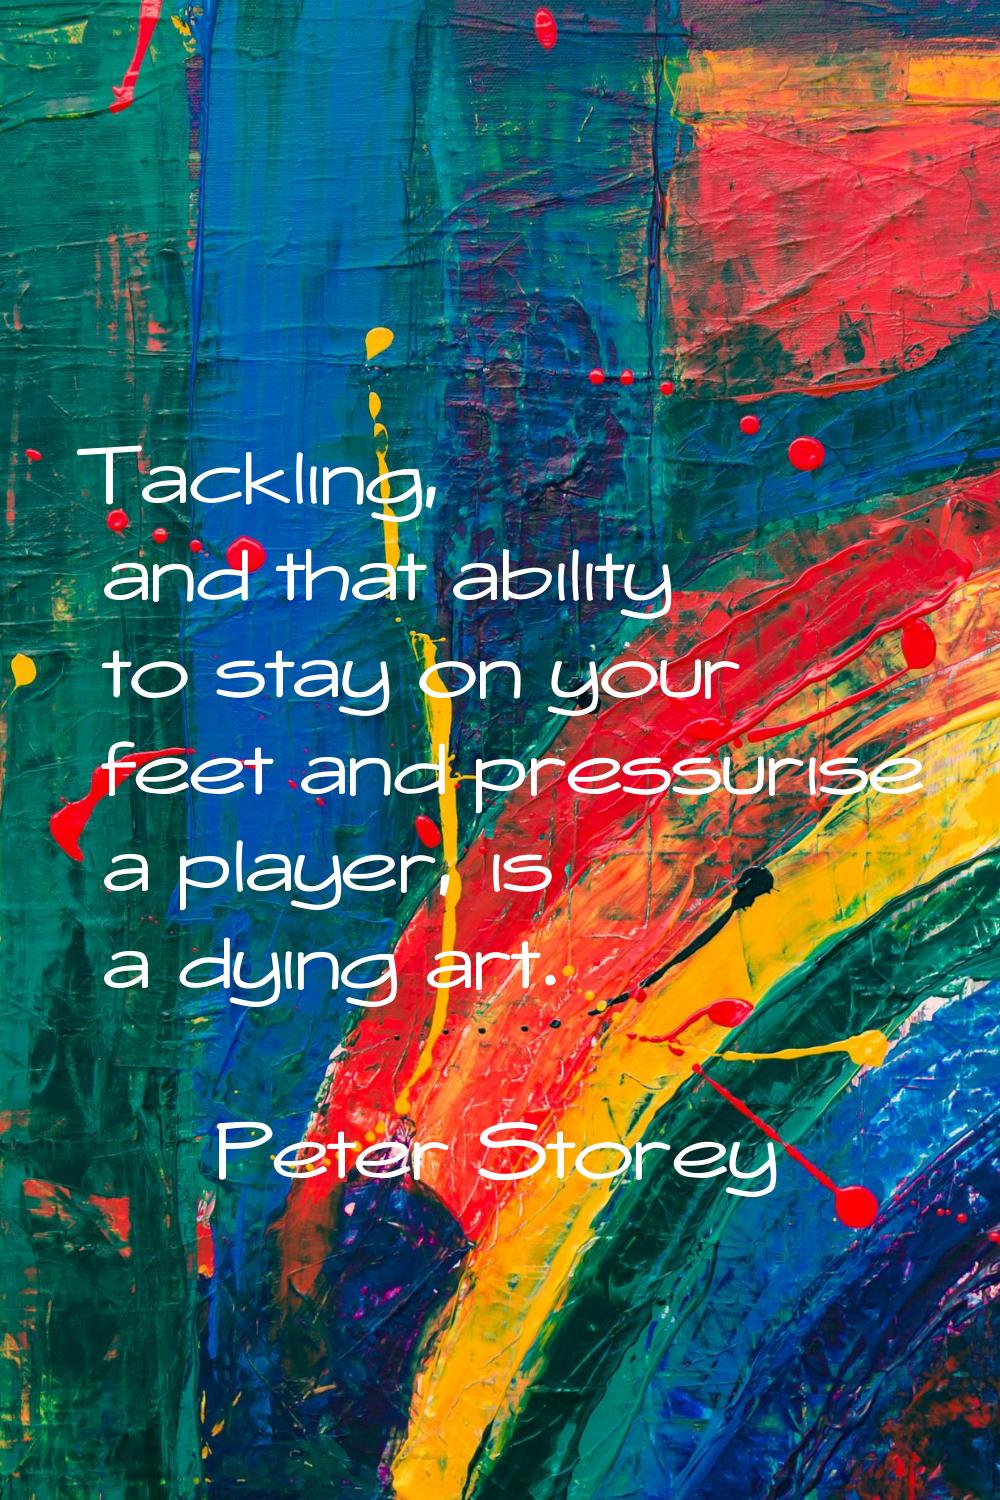 Tackling, and that ability to stay on your feet and pressurise a player, is a dying art.